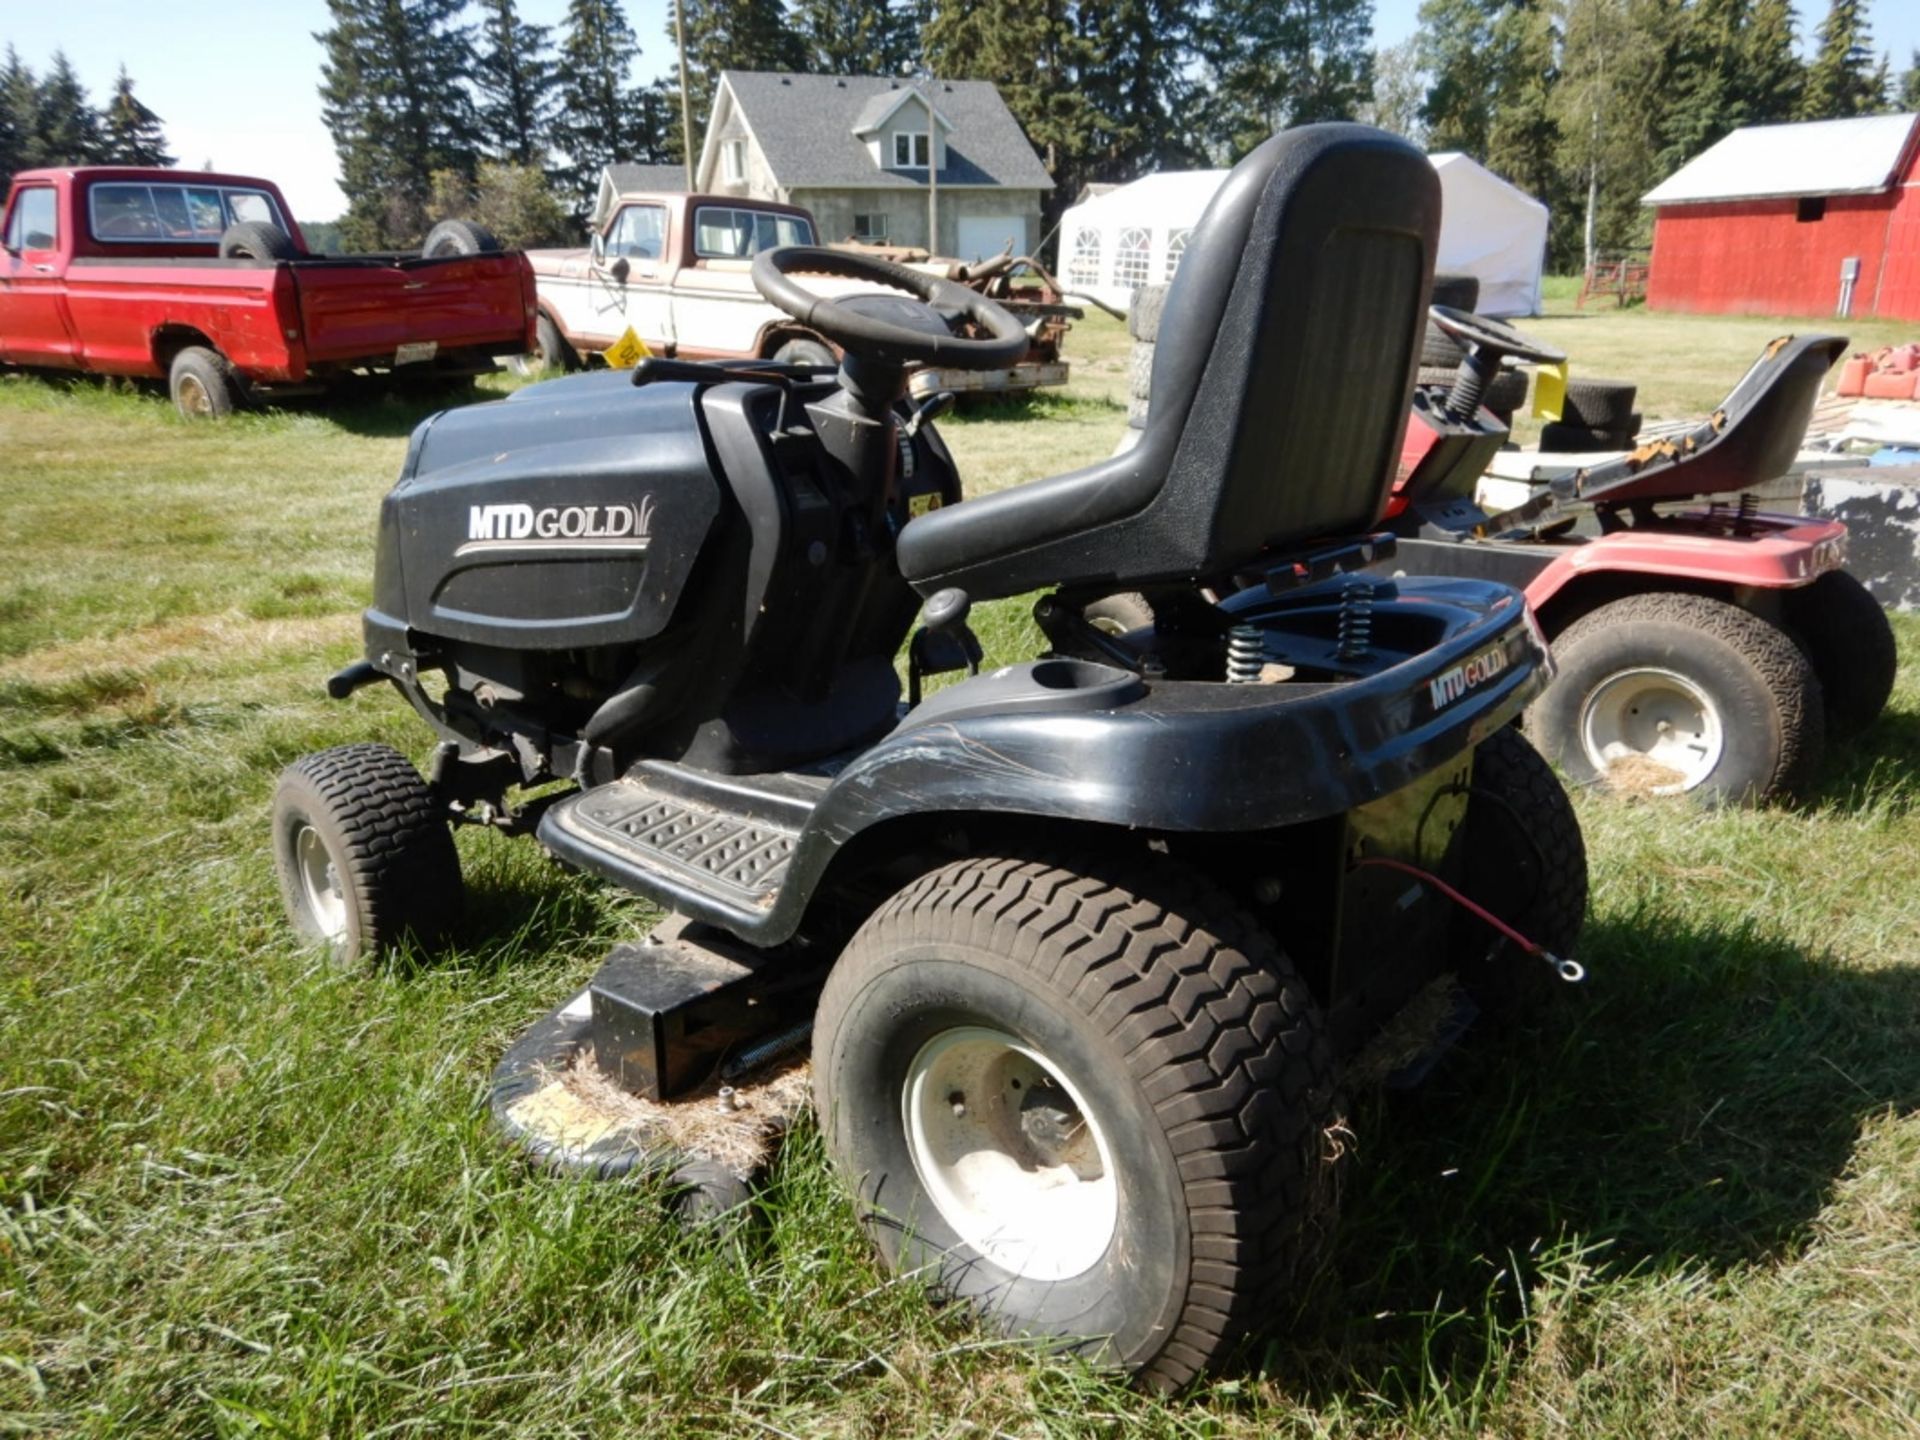 MTD GOLD RIDE-ON LAWN MOWER, 19HP, 46" DECK - Image 3 of 5